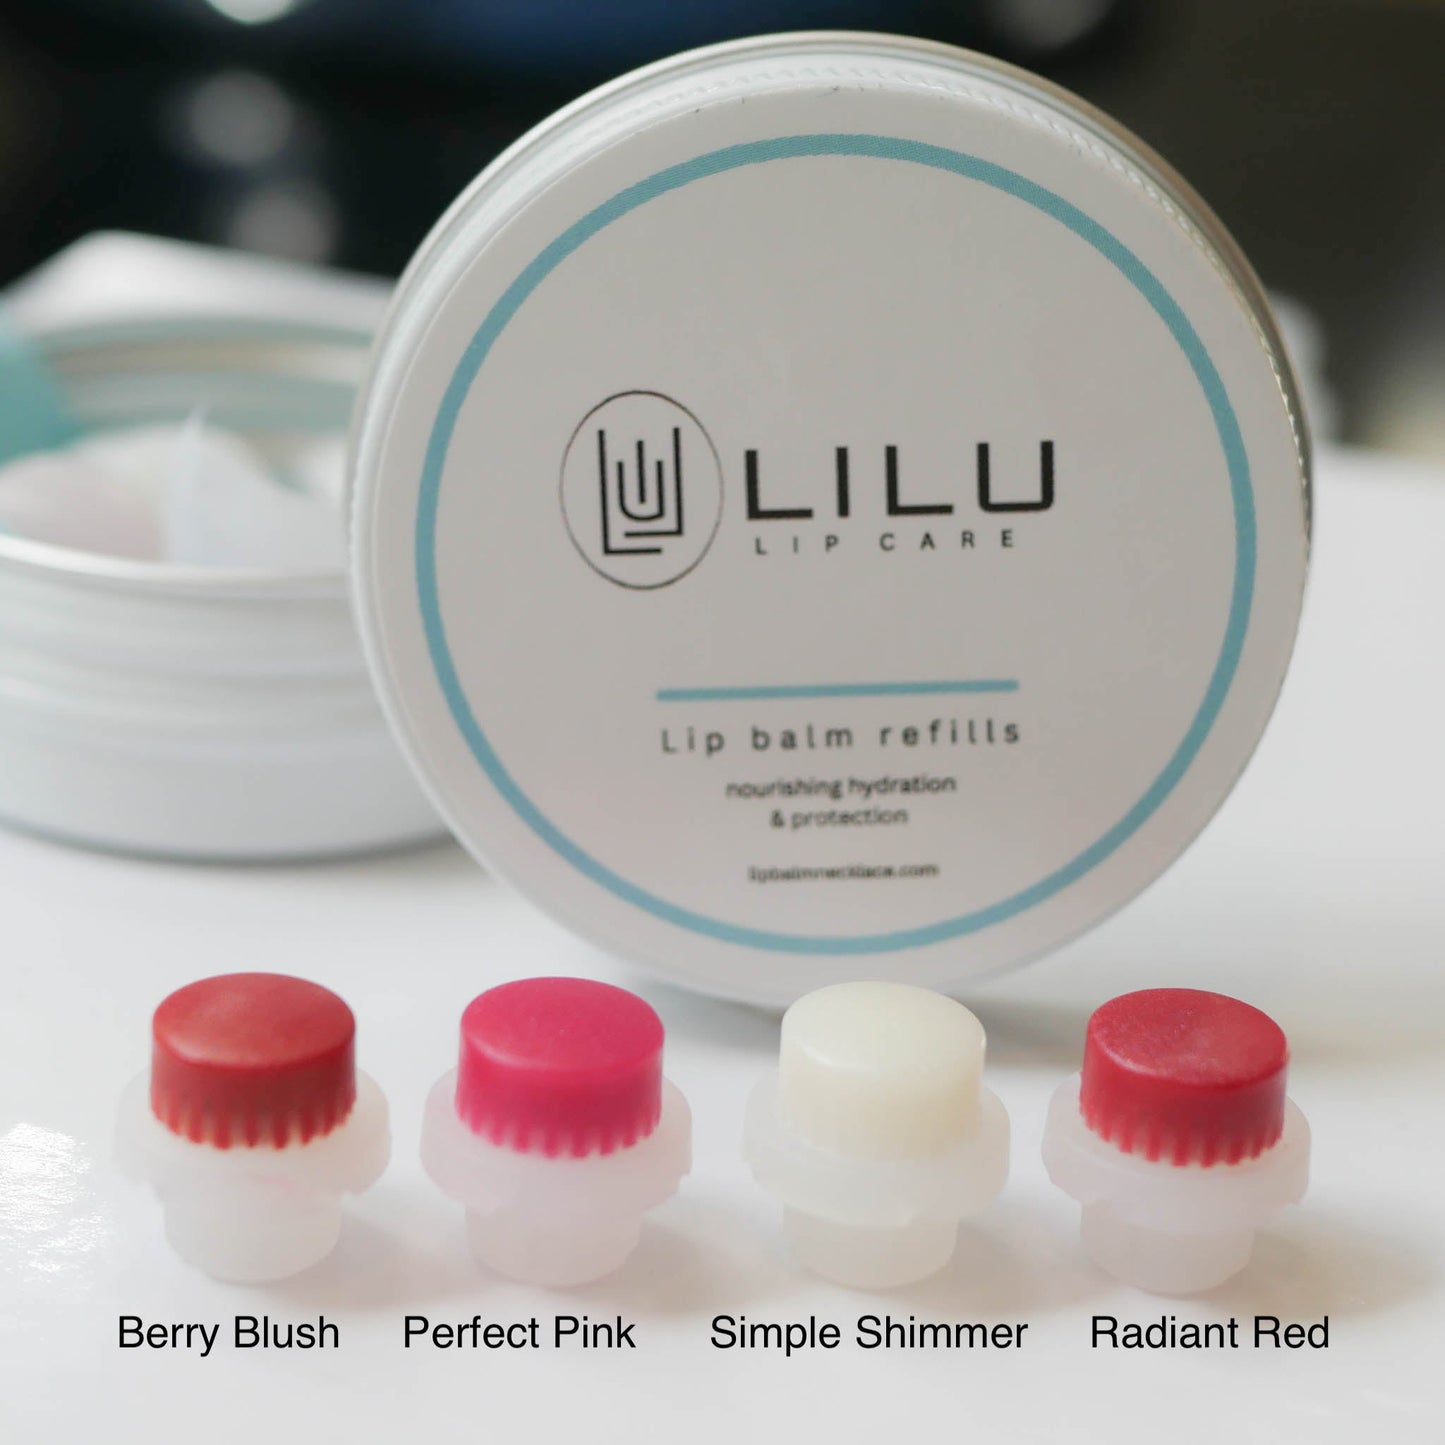 LiLu Lip Balm Necklace Cosette Gold Plated with 8 Lip Balm Refills or DIY Refills - Use Your Balm